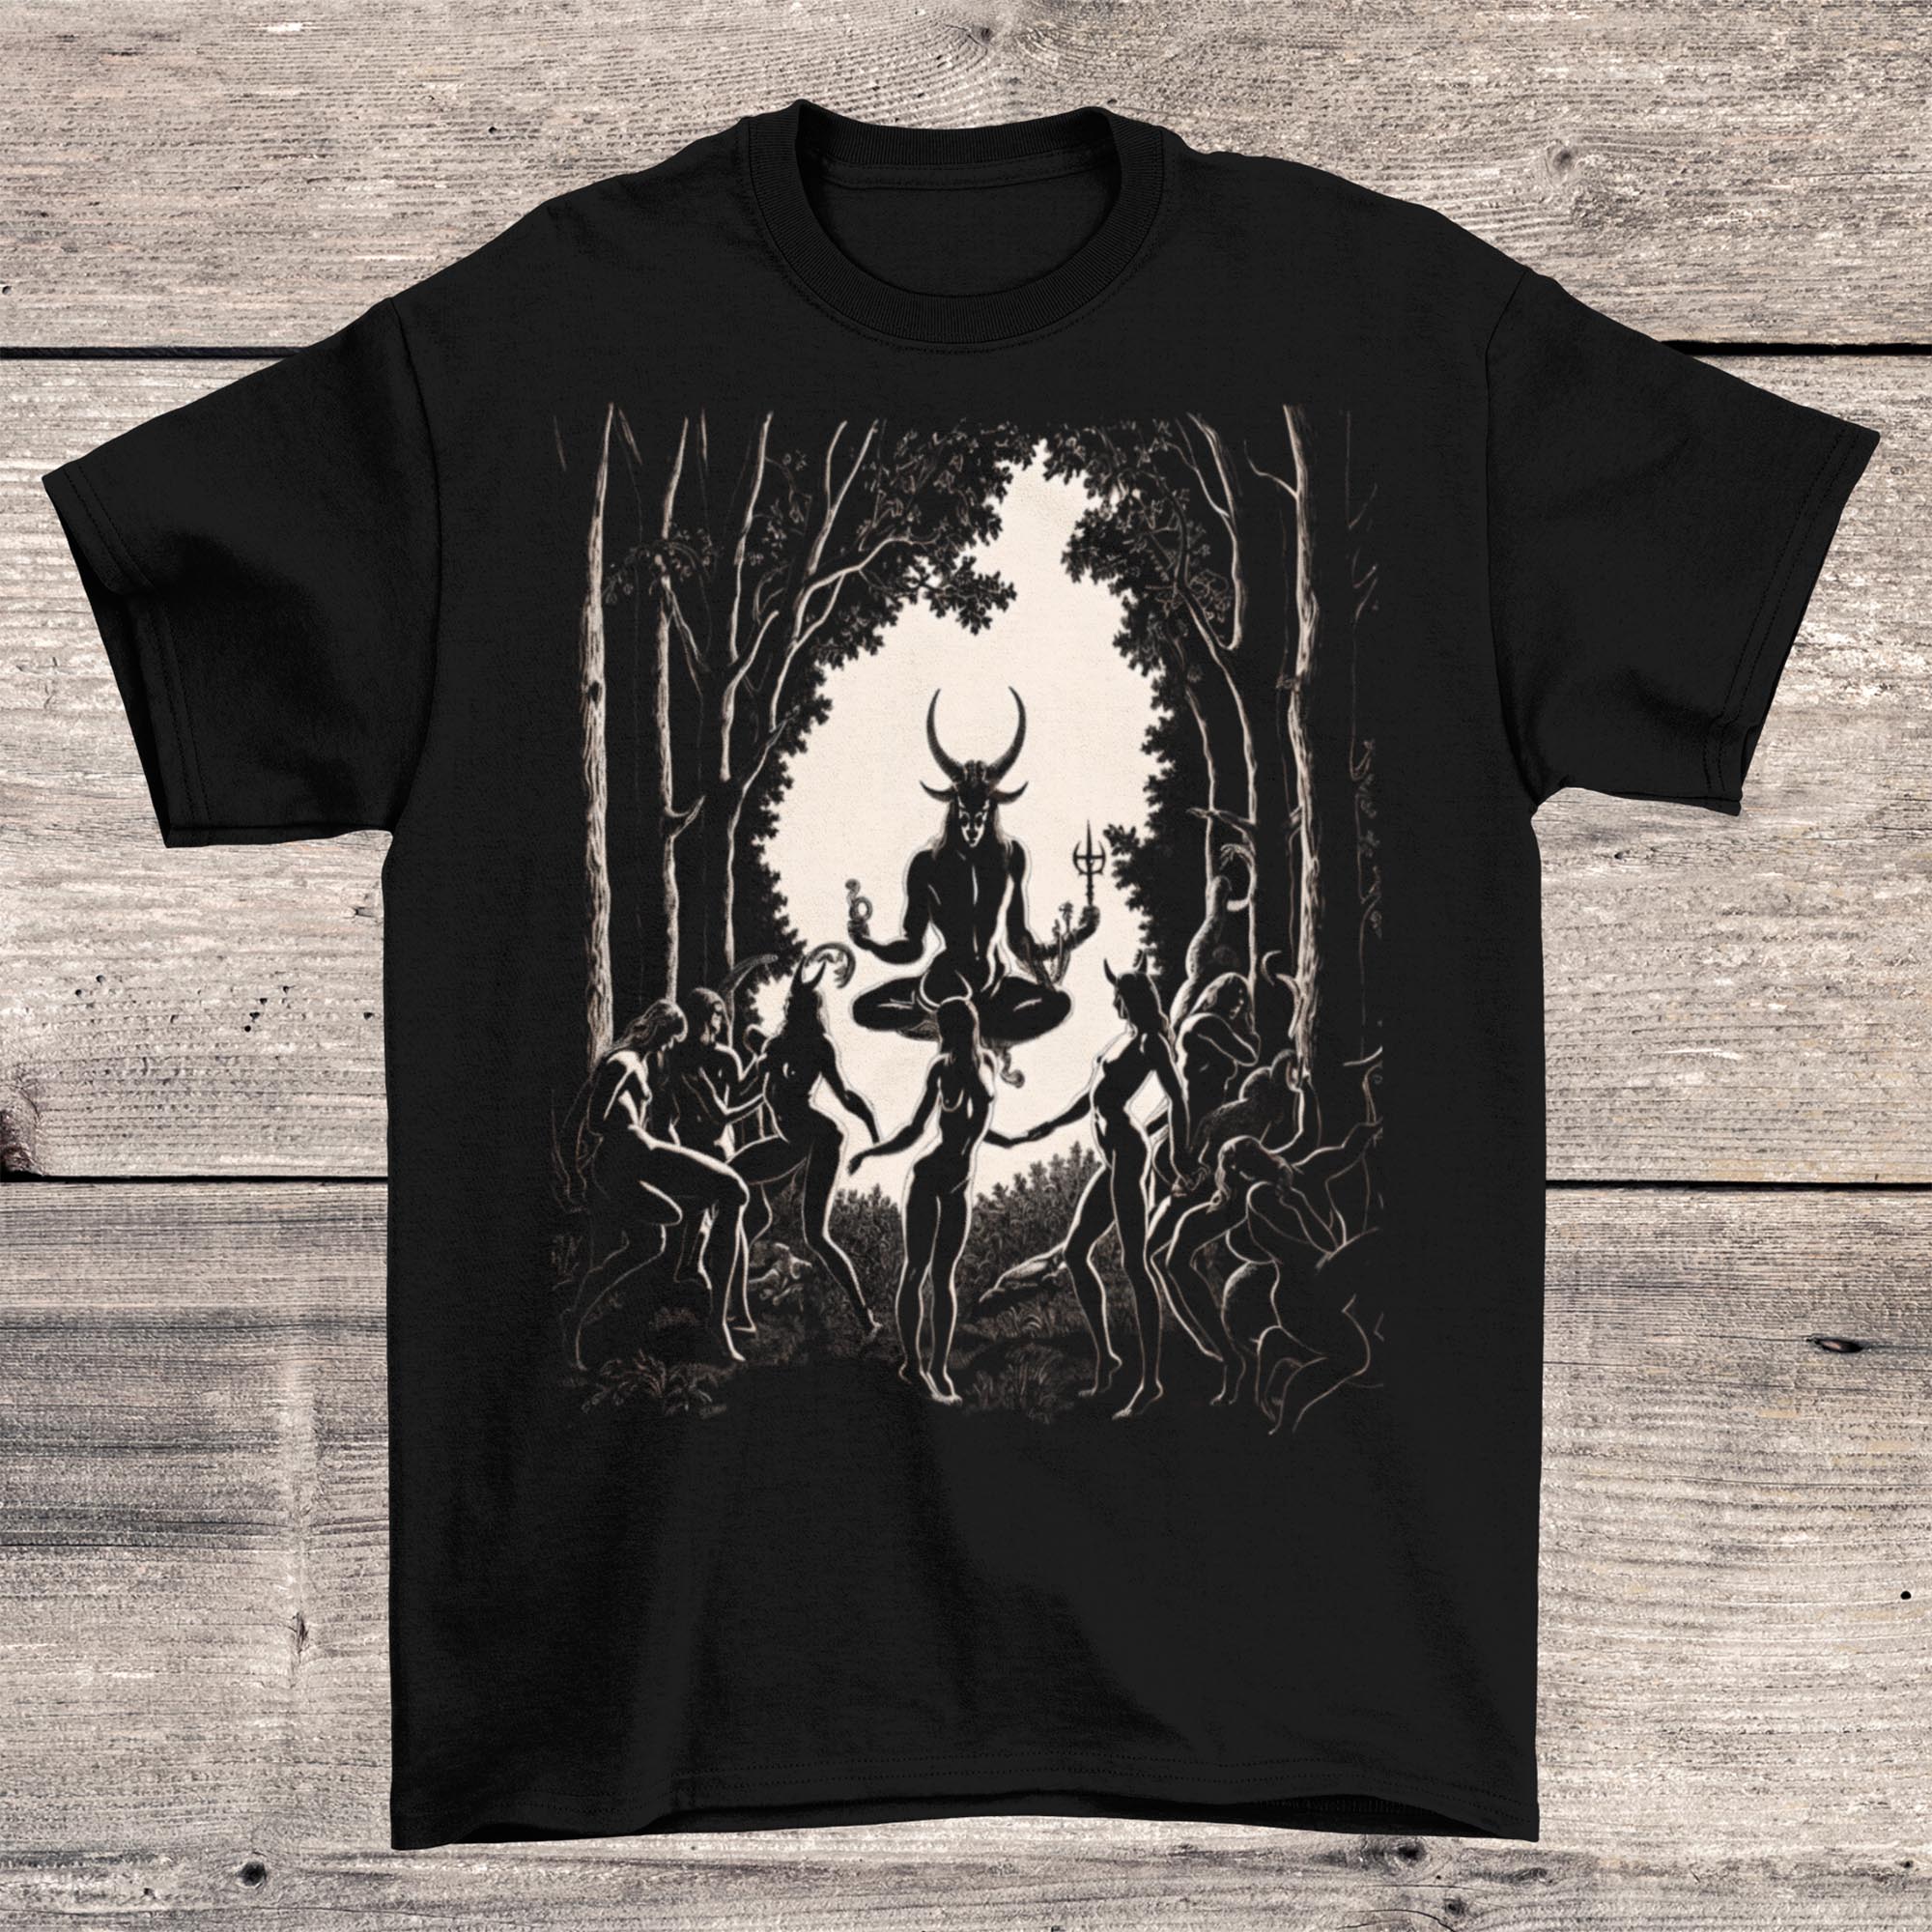 T-Shirts Pan T-Shirt, Satyr of Sacred Sexuality | Heathen, Nature Spirit | Pagan Wiccan Occult Witches | Dark Witchy Ritual Graphic Art T-Shirt